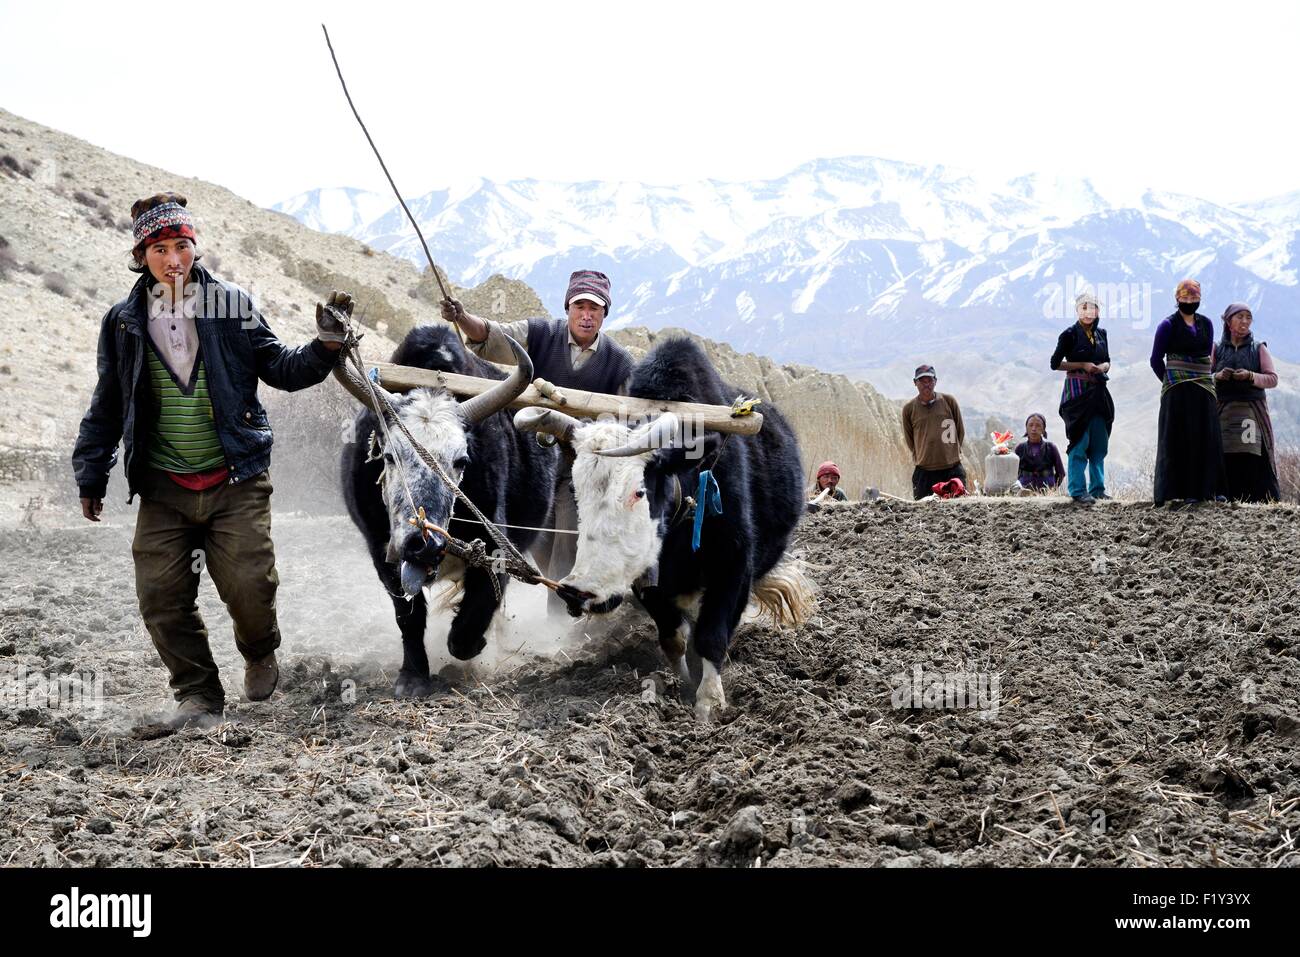 Nepal, Gandaki zone, Upper Mustang (near the border with Tibet), farmers ploughing a field with yaks Stock Photo